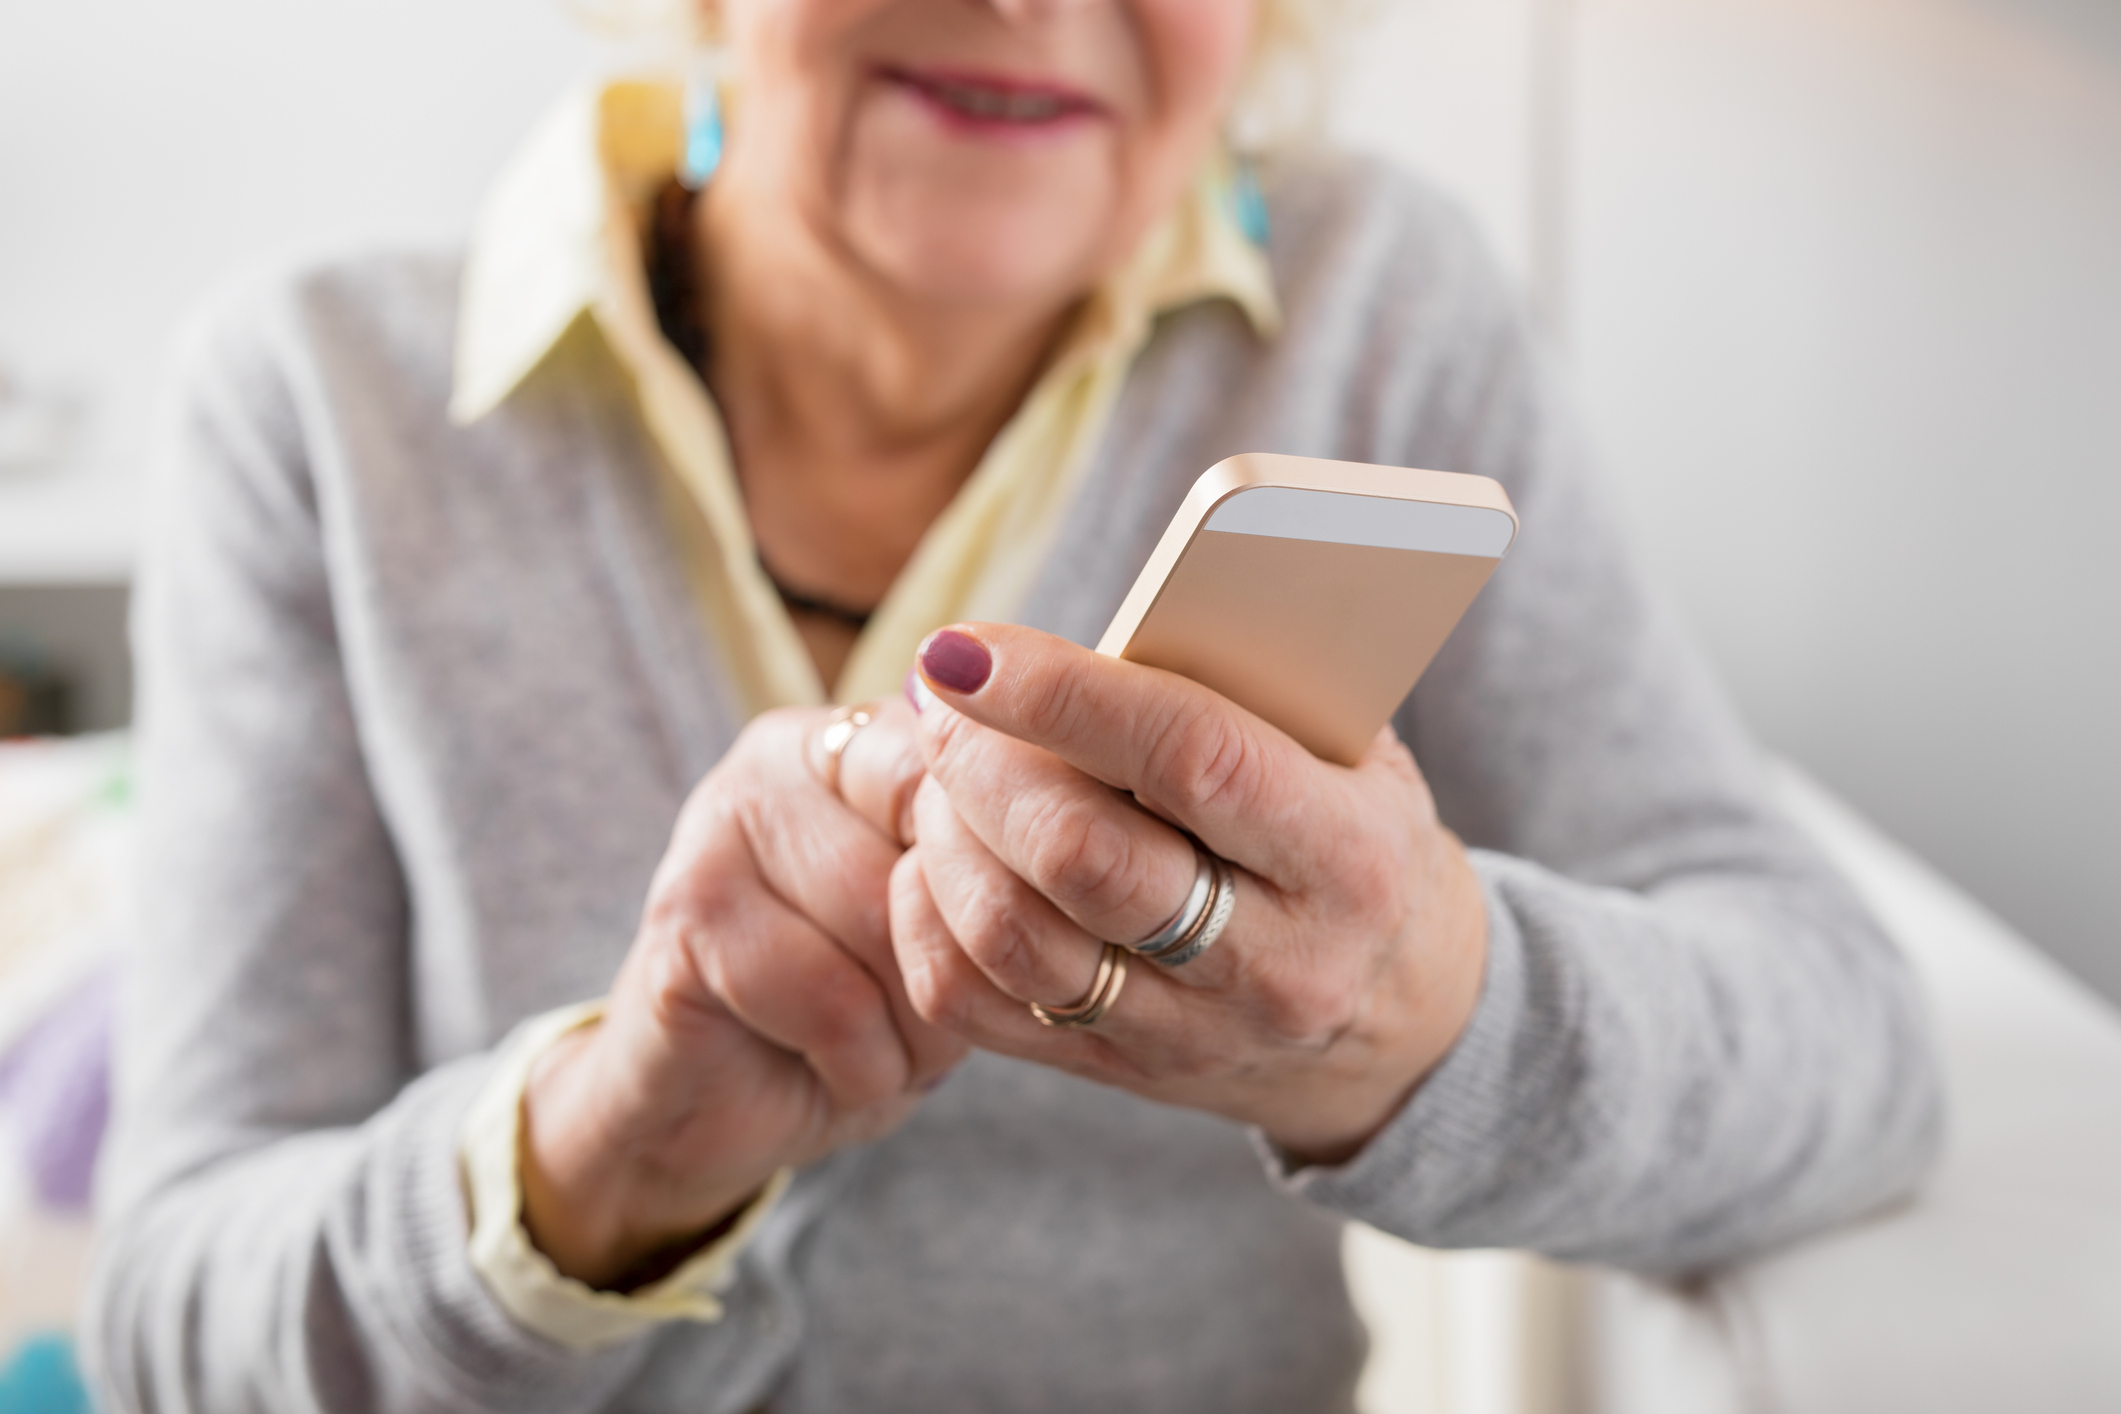 Senior woman holding smartphone in hands and exploring new technology